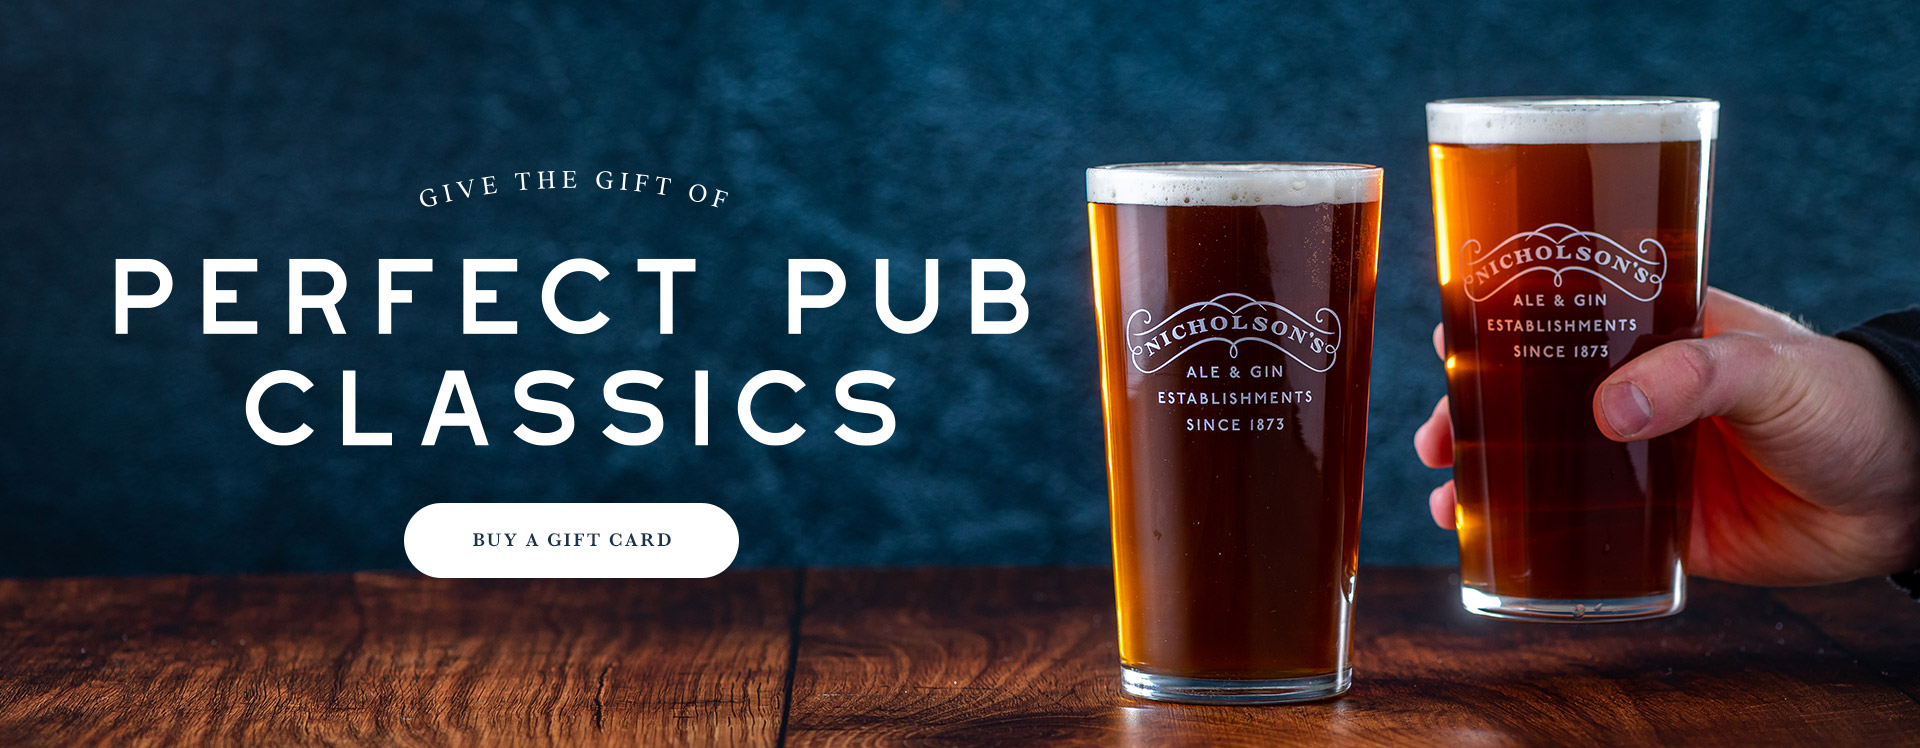 Nicholson’s Pub Gift Voucher at Marquis Of Granby, Westminster in London